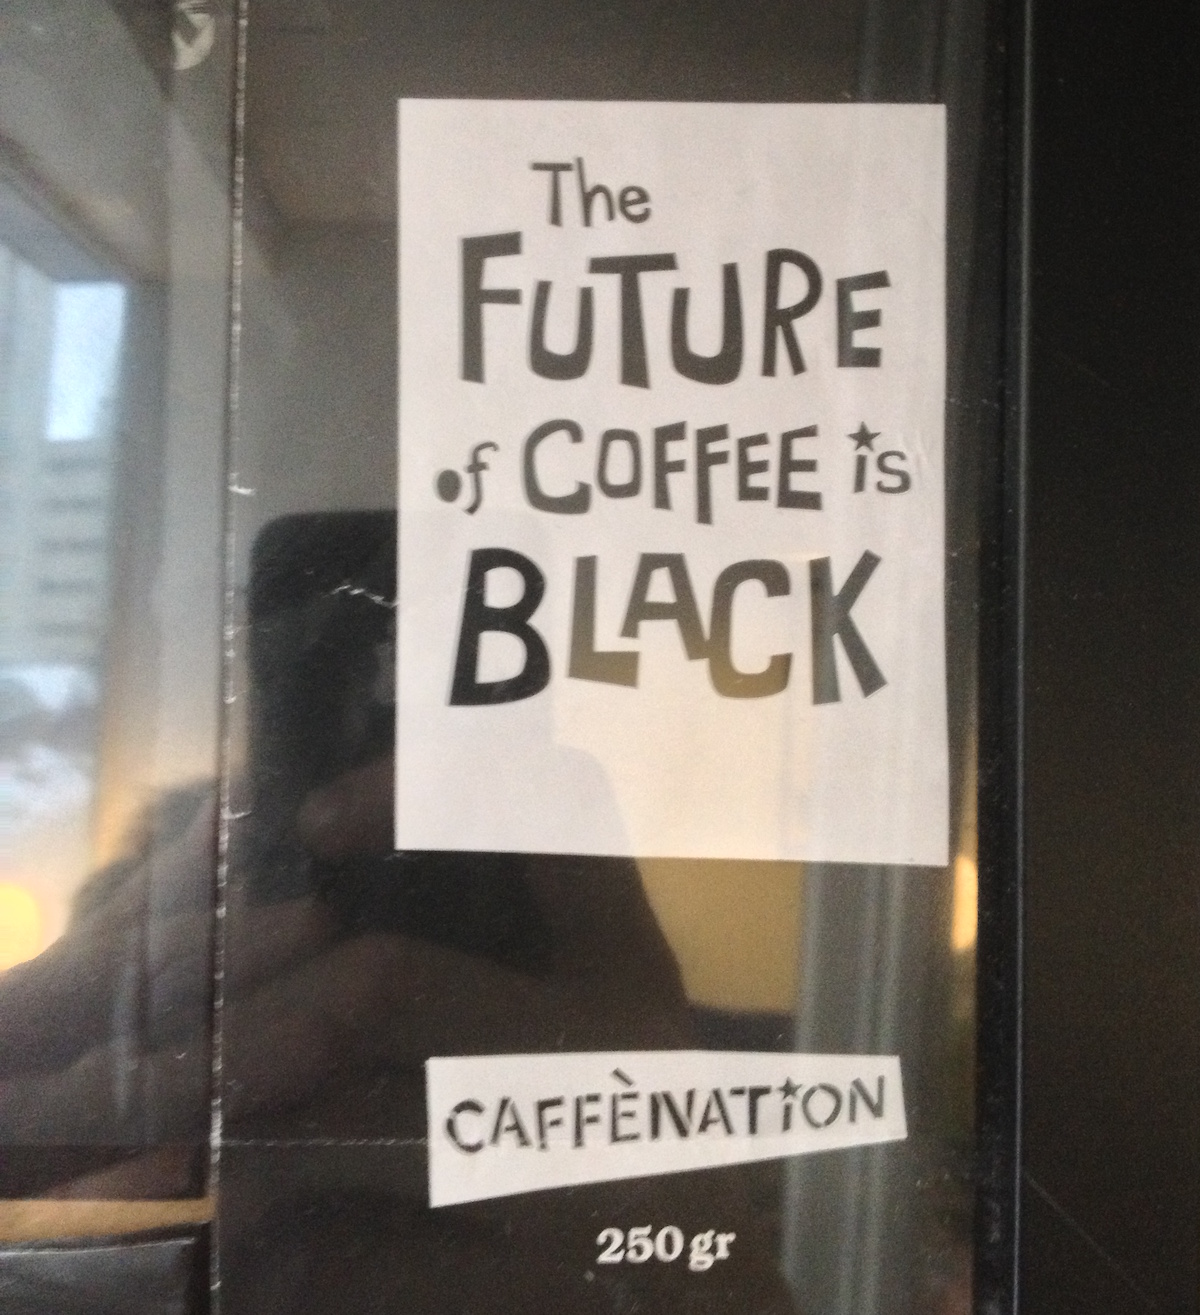 The Future of Coffee is Black